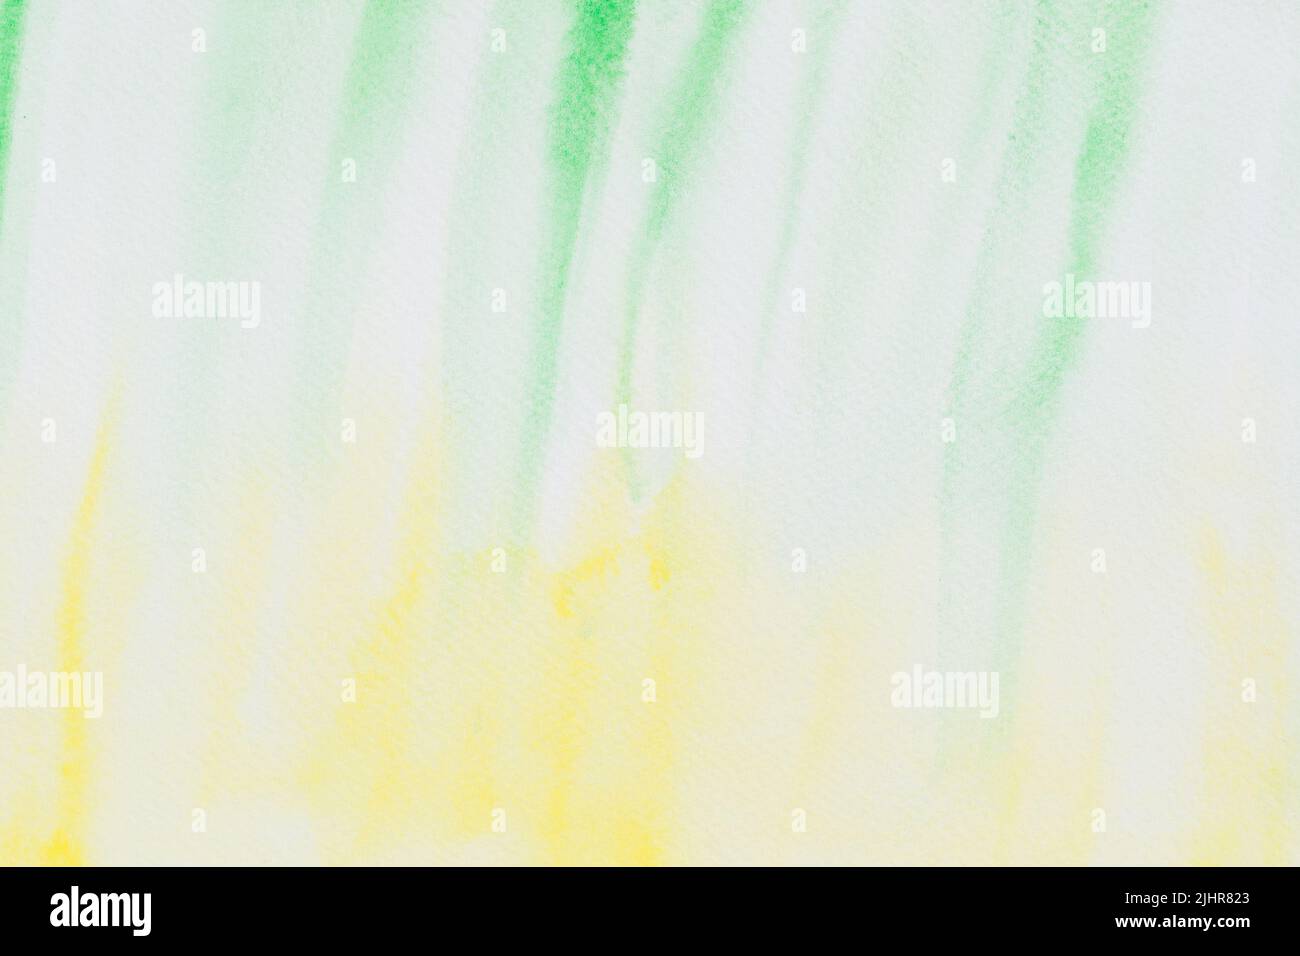 white, green,  yellow watercolor painted on paper background texture Stock Photo